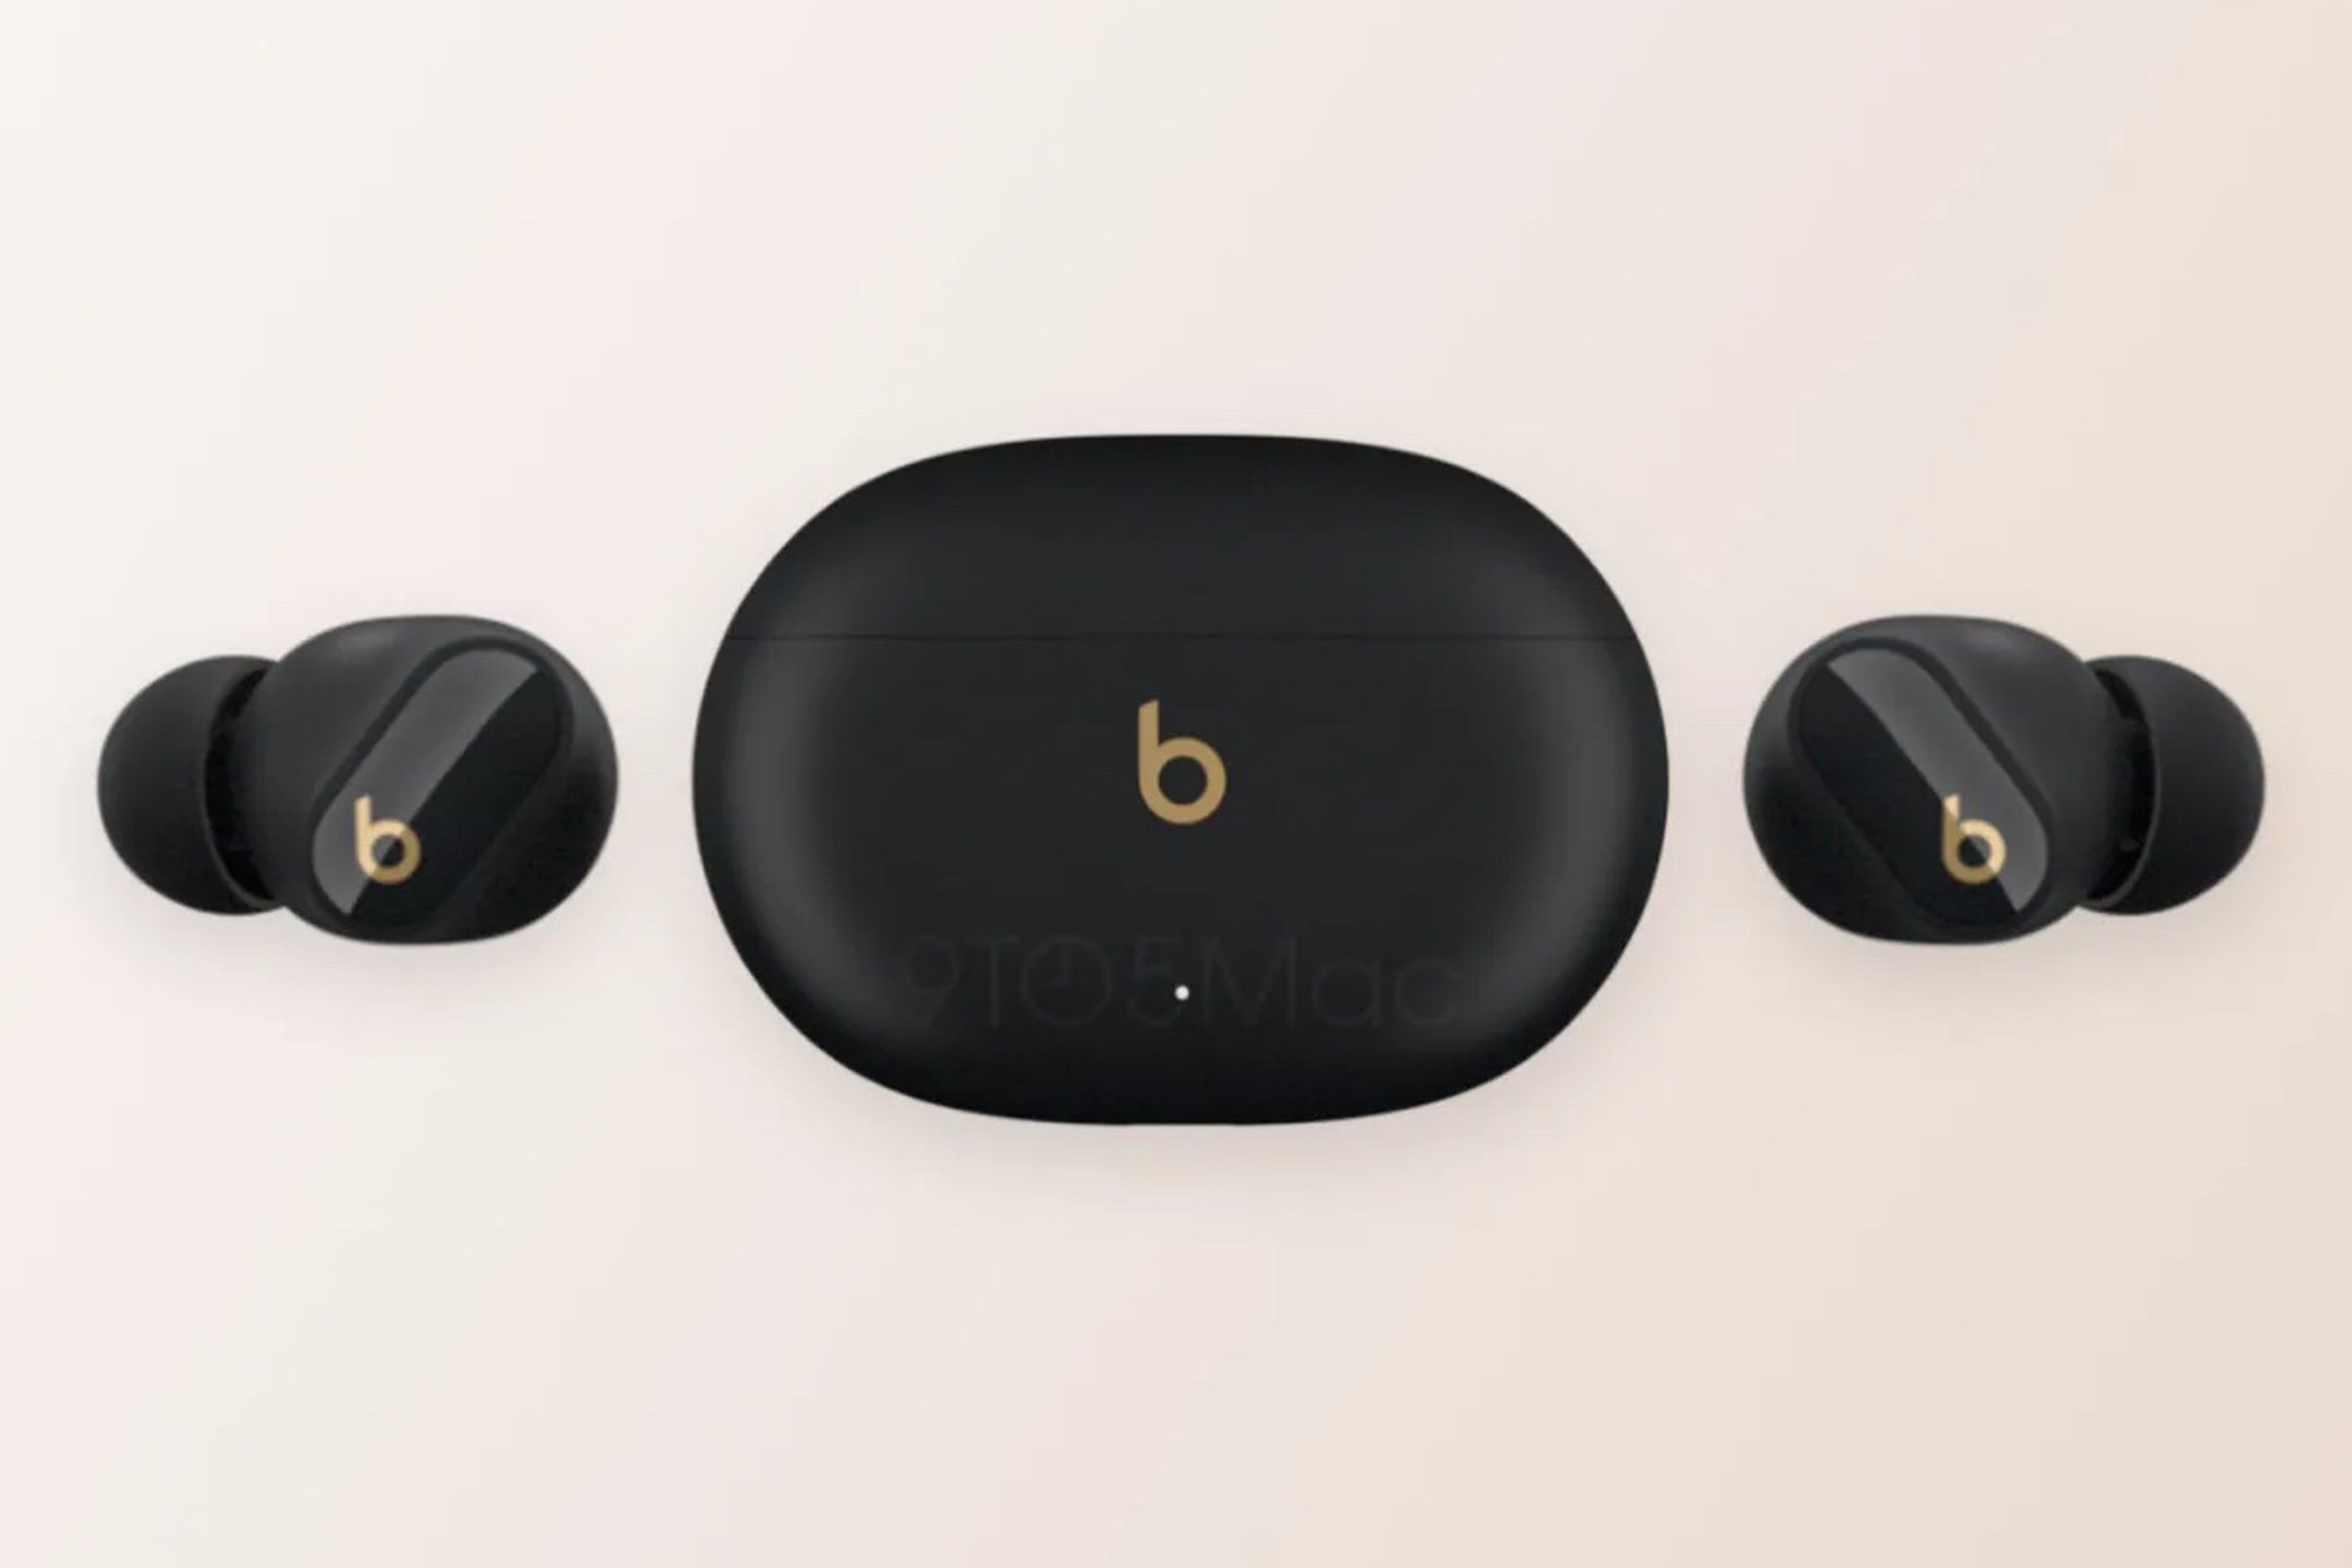 Images of the upcoming Beats Studio Buds Plus earbuds.